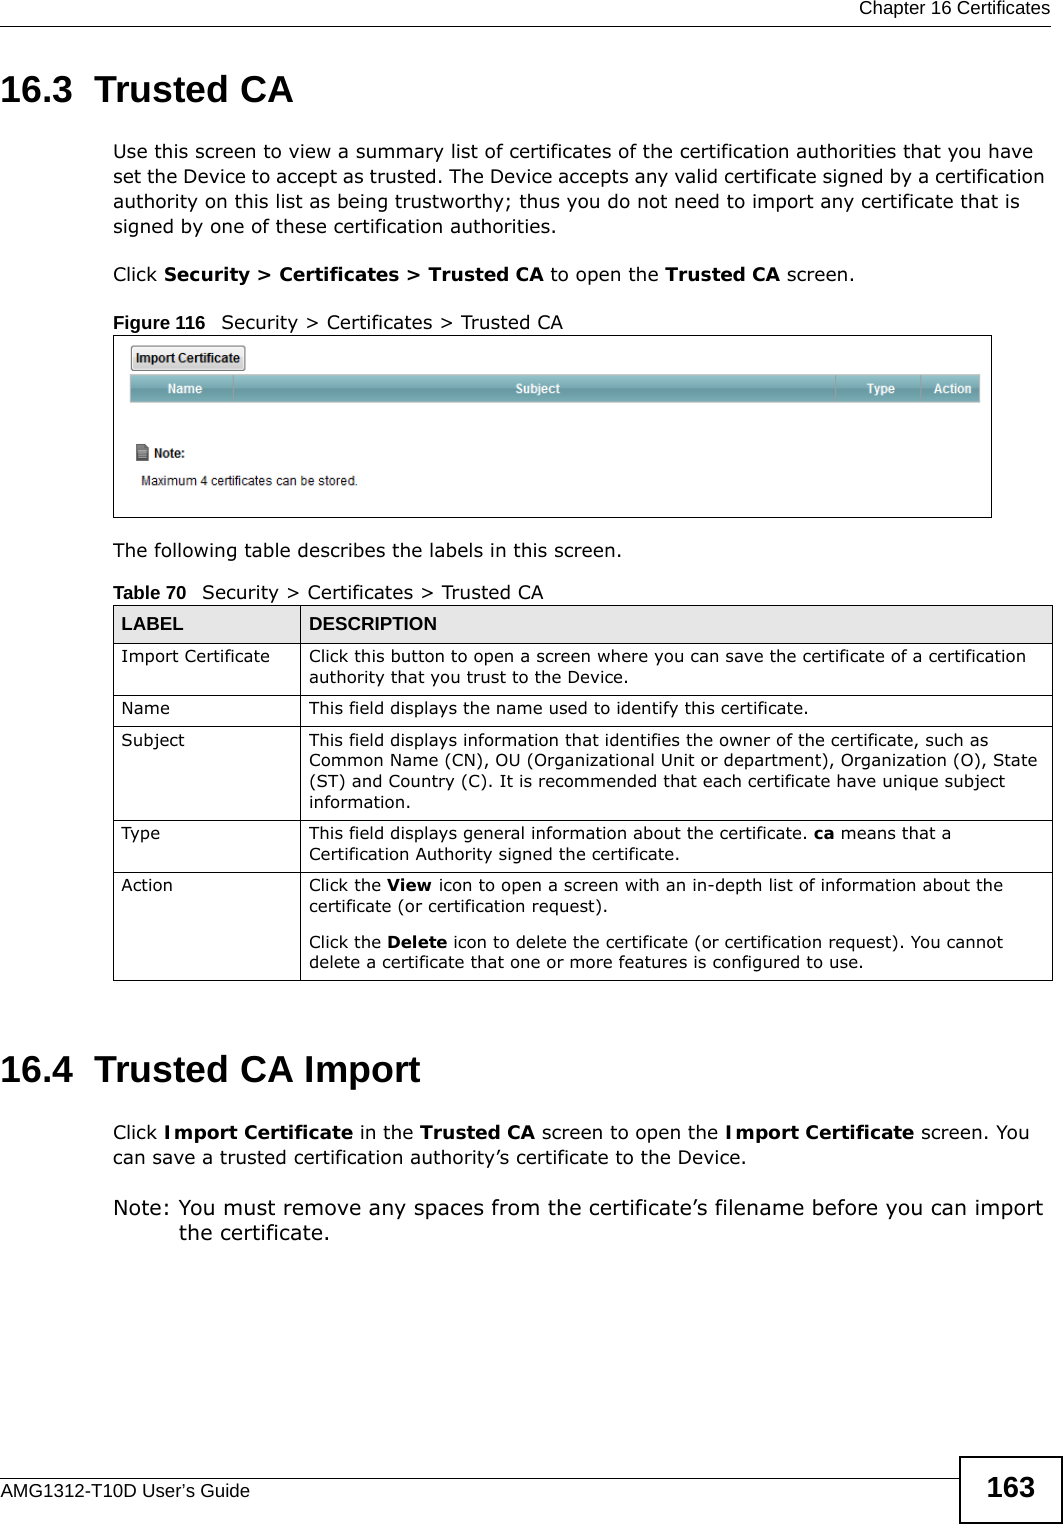  Chapter 16 CertificatesAMG1312-T10D User’s Guide 16316.3  Trusted CA   Use this screen to view a summary list of certificates of the certification authorities that you have set the Device to accept as trusted. The Device accepts any valid certificate signed by a certification authority on this list as being trustworthy; thus you do not need to import any certificate that is signed by one of these certification authorities. Click Security &gt; Certificates &gt; Trusted CA to open the Trusted CA screen. Figure 116   Security &gt; Certificates &gt; Trusted CAThe following table describes the labels in this screen. 16.4  Trusted CA Import   Click Import Certificate in the Trusted CA screen to open the Import Certificate screen. You can save a trusted certification authority’s certificate to the Device.Note: You must remove any spaces from the certificate’s filename before you can import the certificate.Table 70   Security &gt; Certificates &gt; Trusted CALABEL DESCRIPTIONImport Certificate Click this button to open a screen where you can save the certificate of a certification authority that you trust to the Device.Name This field displays the name used to identify this certificate. Subject This field displays information that identifies the owner of the certificate, such as Common Name (CN), OU (Organizational Unit or department), Organization (O), State (ST) and Country (C). It is recommended that each certificate have unique subject information.Type This field displays general information about the certificate. ca means that a Certification Authority signed the certificate. Action Click the View icon to open a screen with an in-depth list of information about the certificate (or certification request).Click the Delete icon to delete the certificate (or certification request). You cannot delete a certificate that one or more features is configured to use.